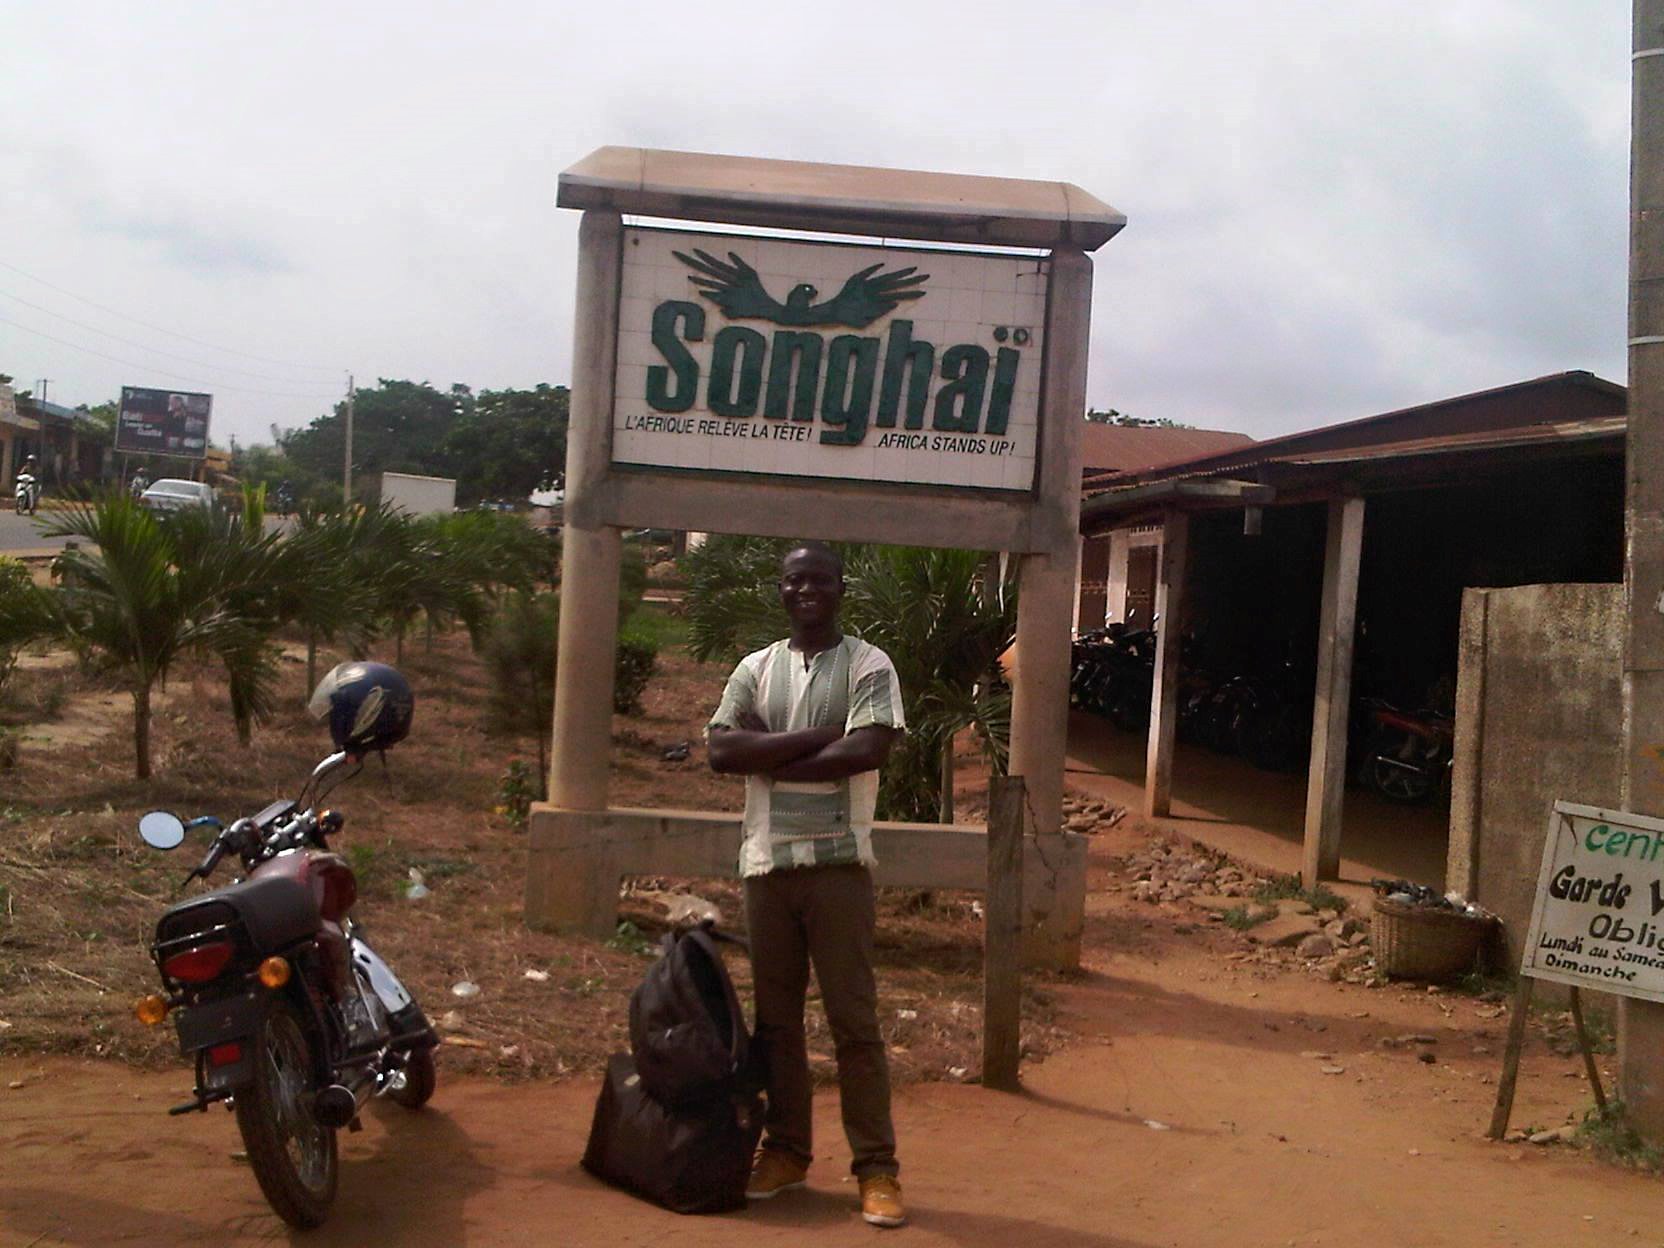 My visit to, and knowledge of what happens in the Songhai Integrated Farming Centre headquarted in Porto Novo